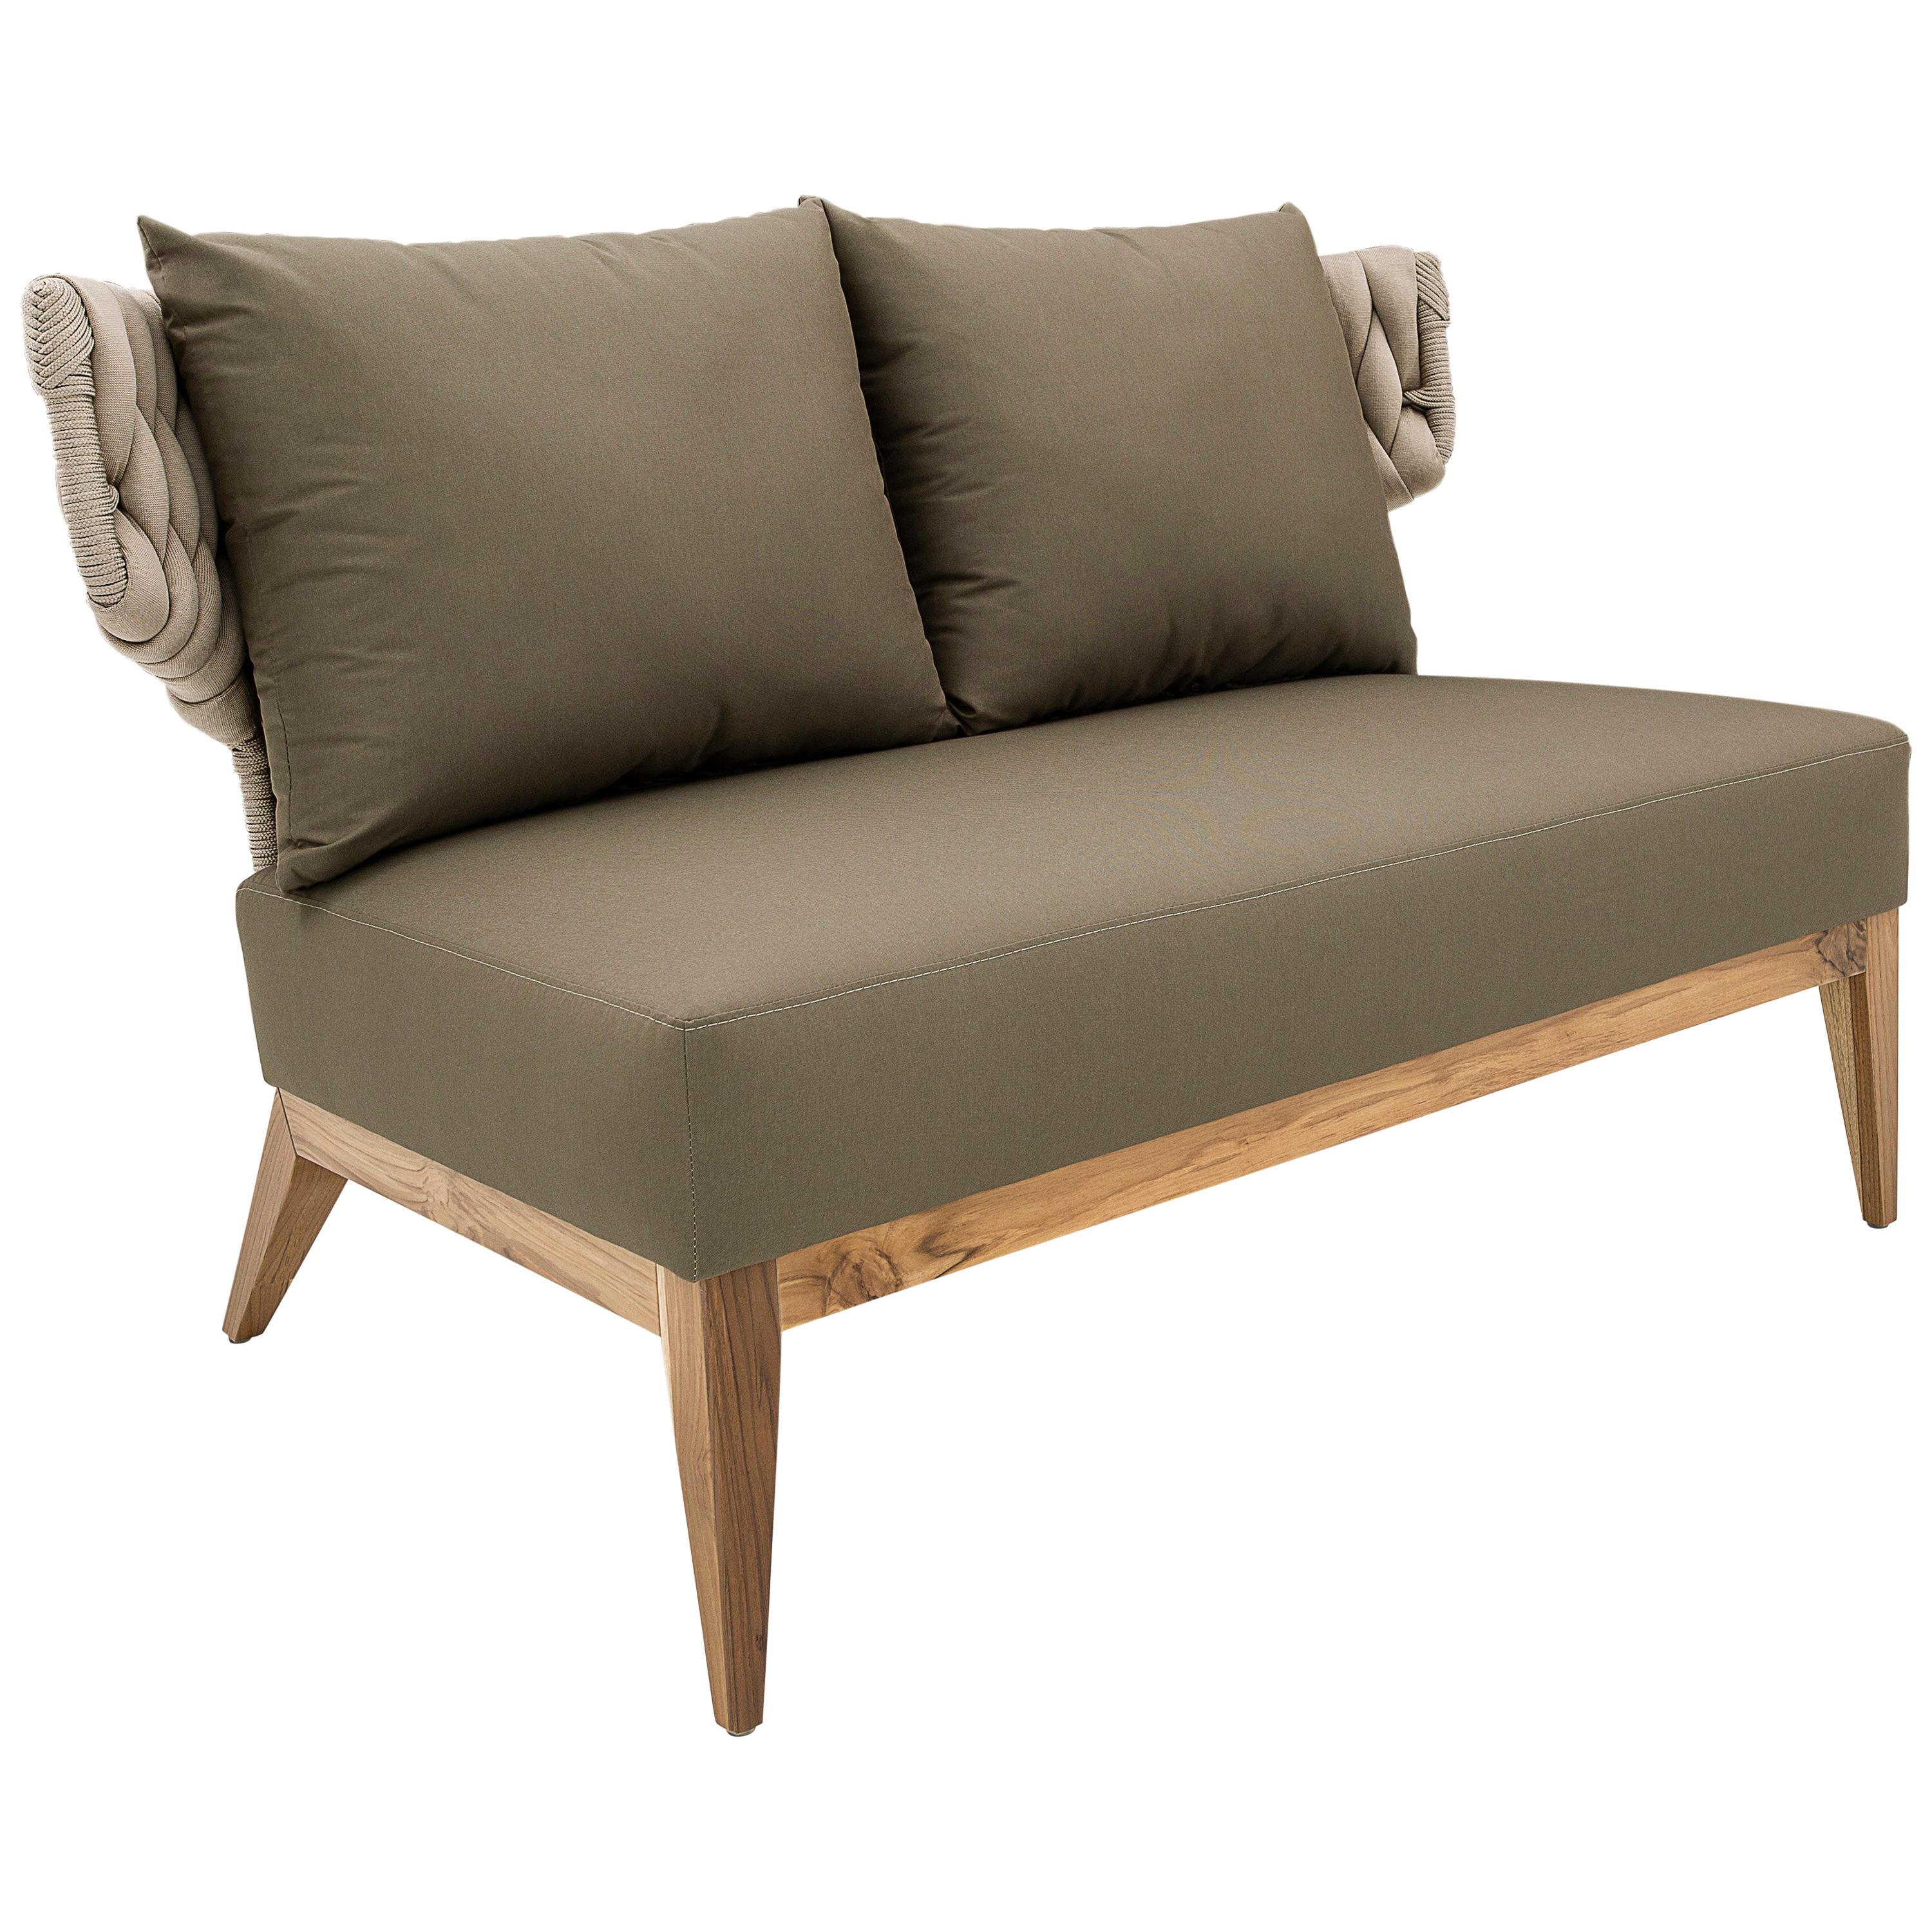 Beluga Outdoor Loveseat in Olive Green fabric and Teak wood For Sale